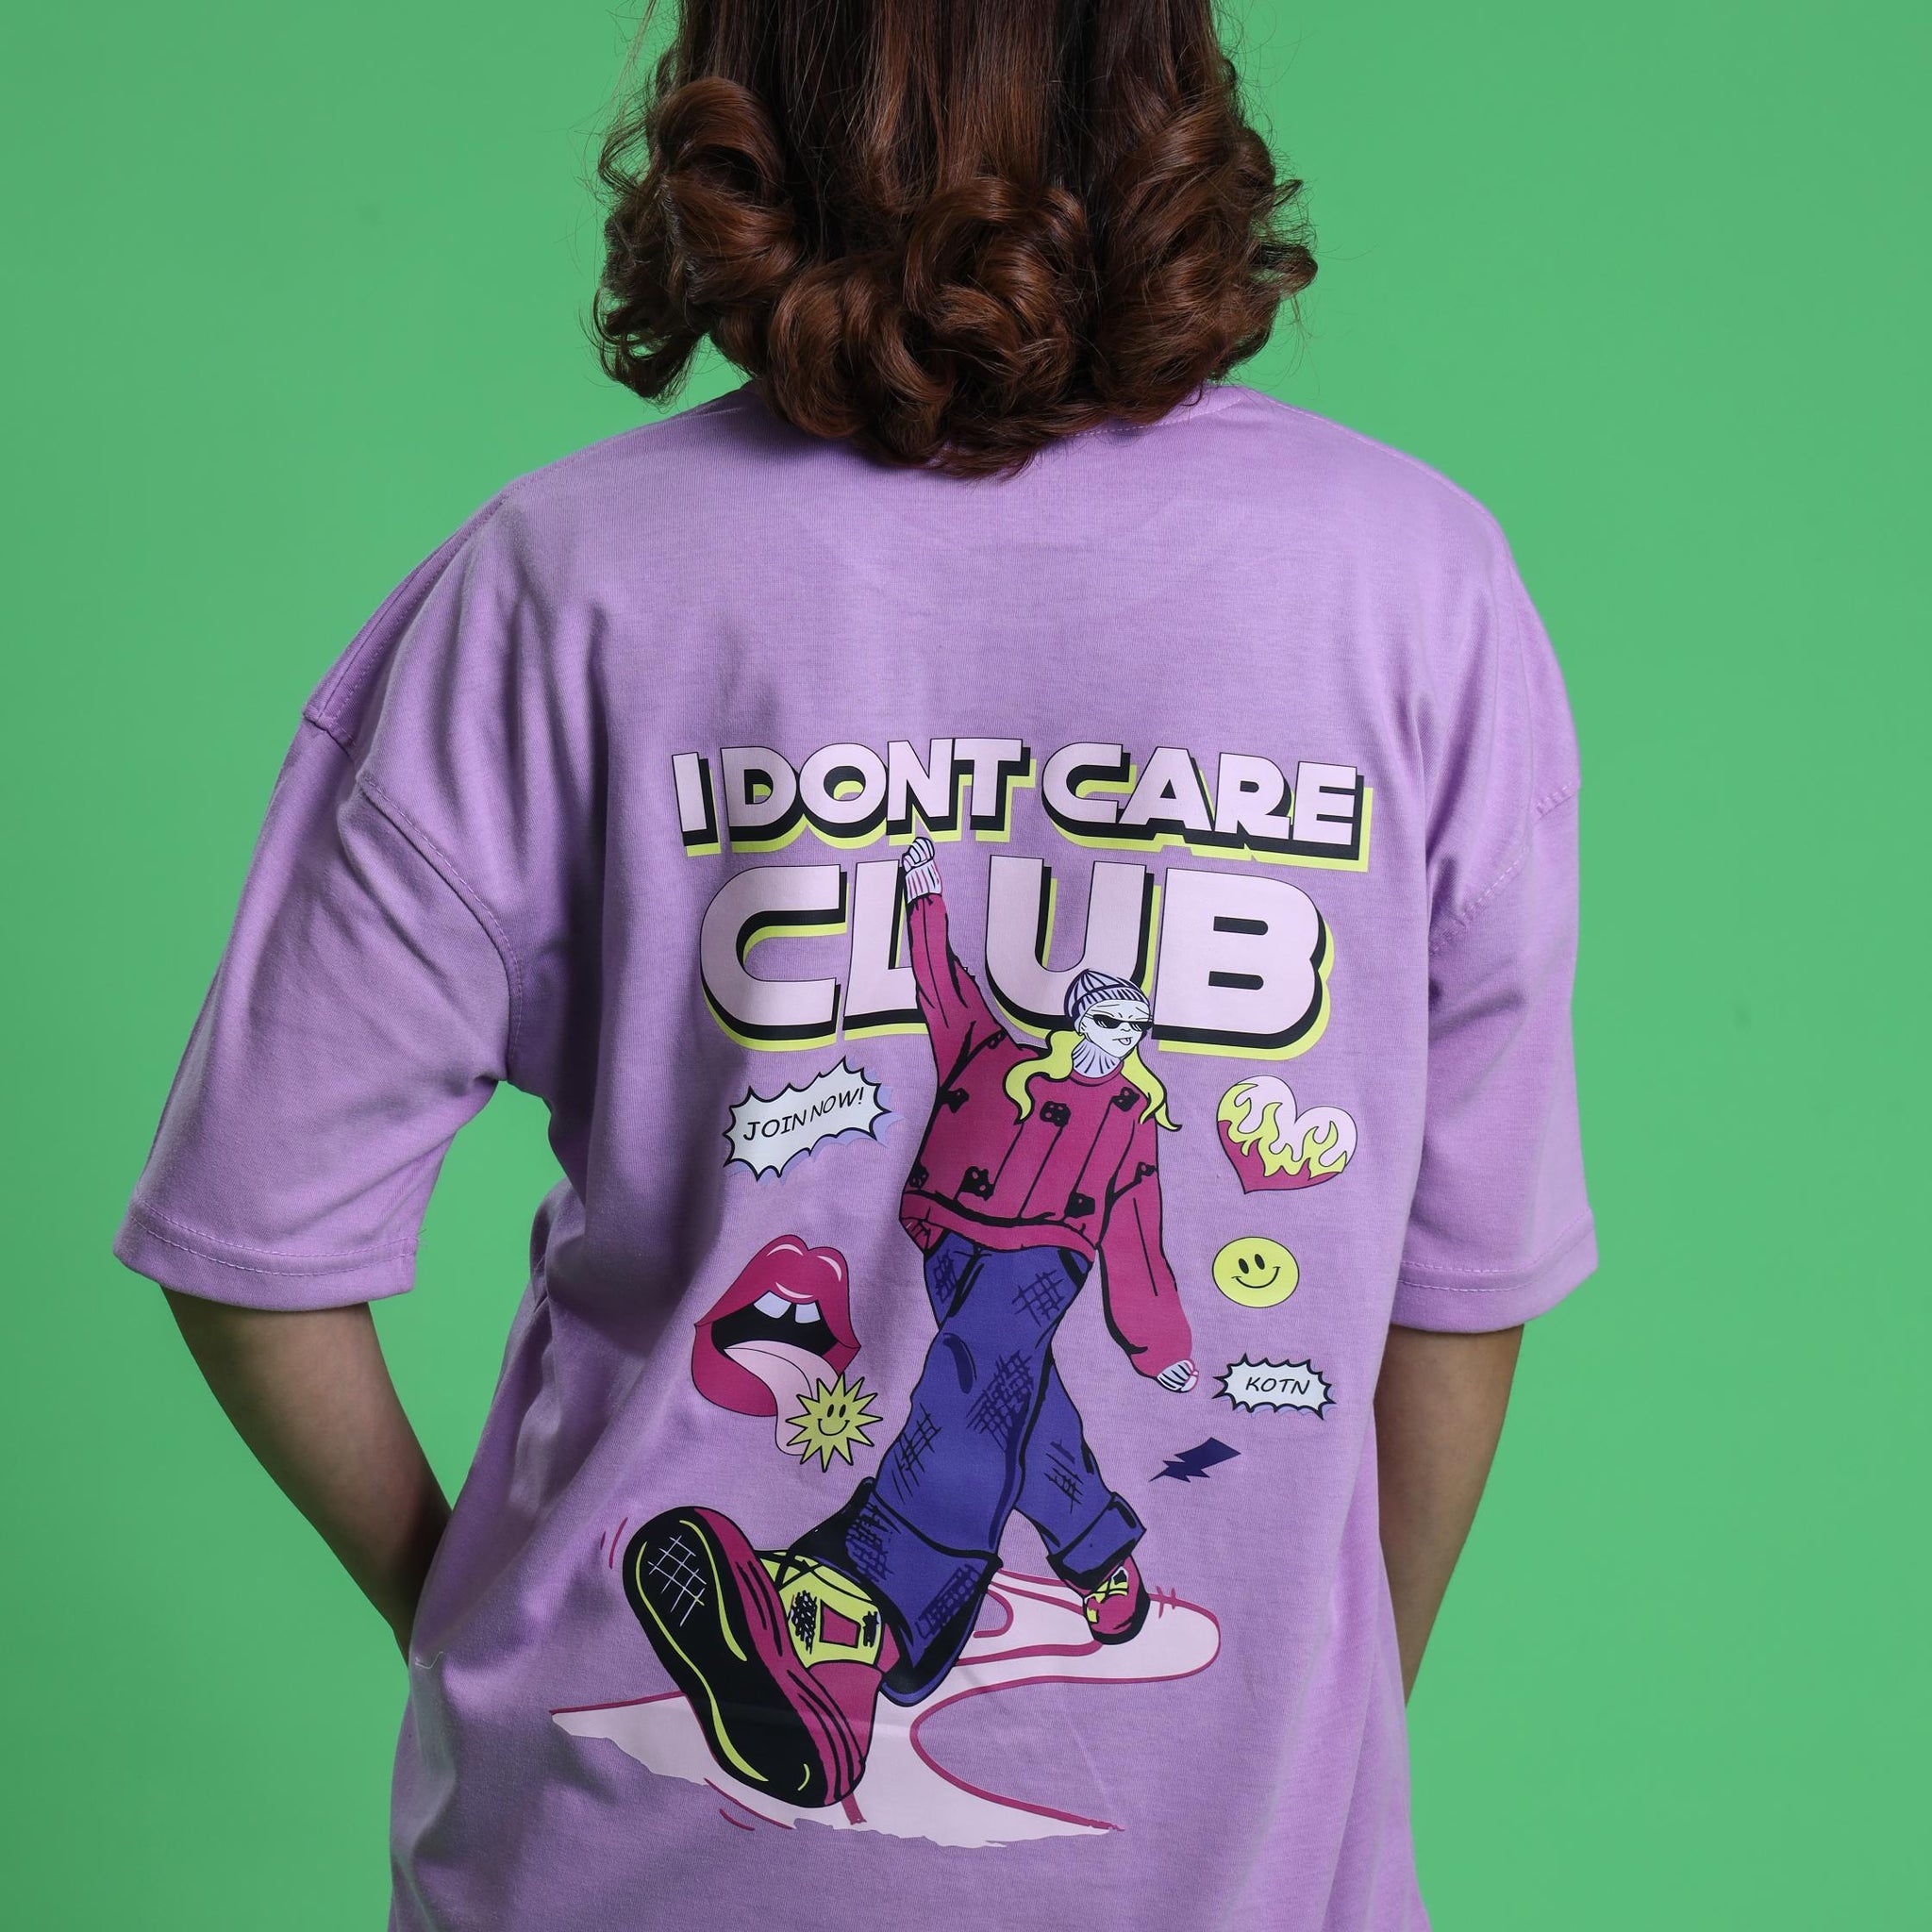 DON’T CARE CLUB OVERSIZED T-SHIRT